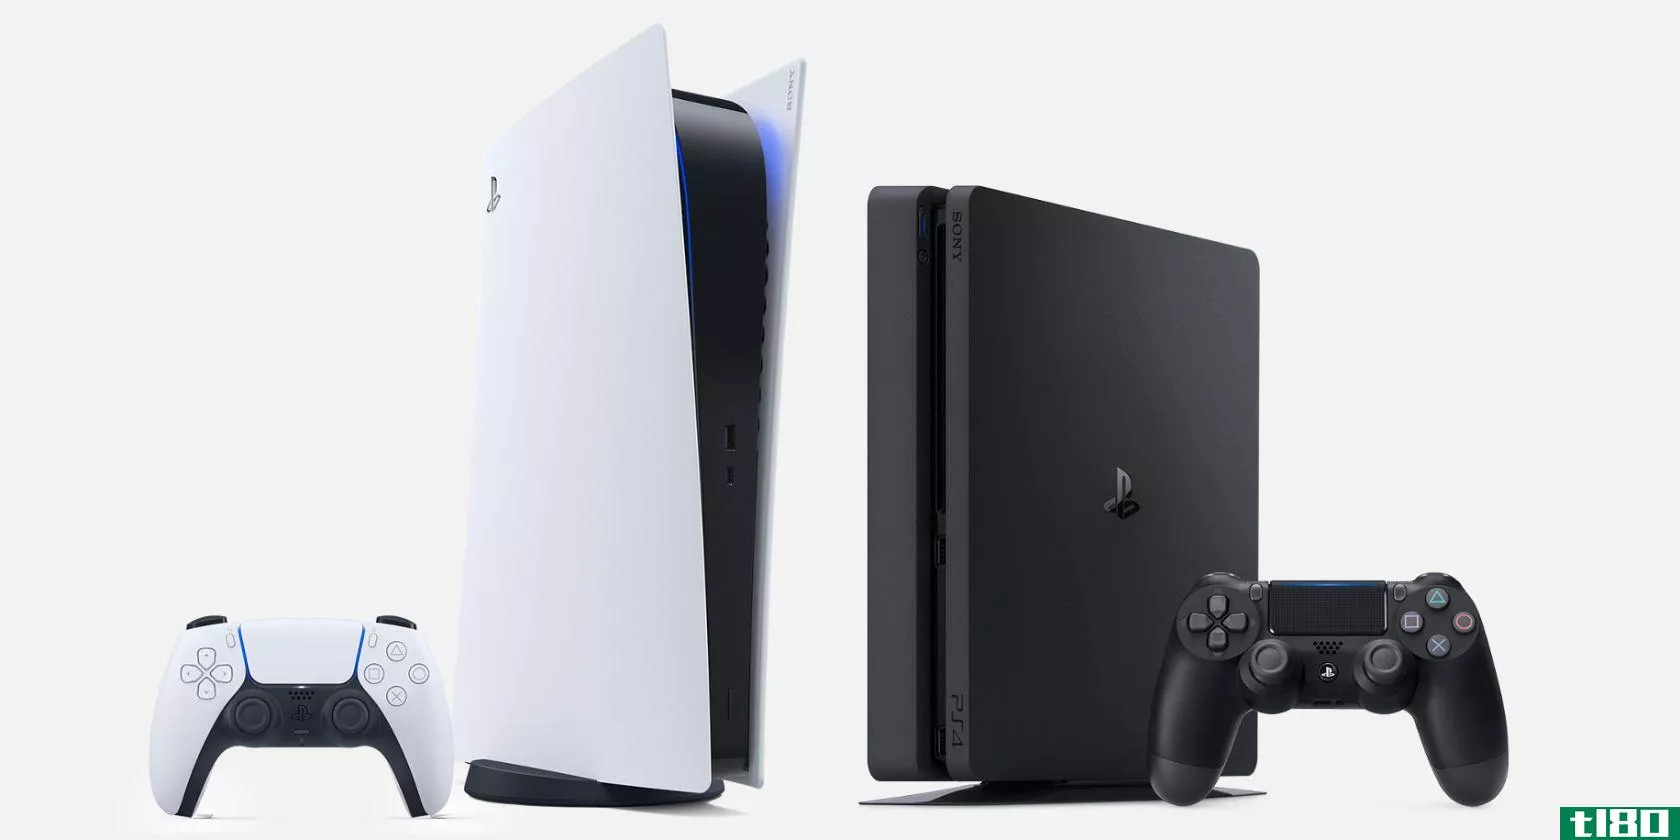 PS5 and PS4 c***oles